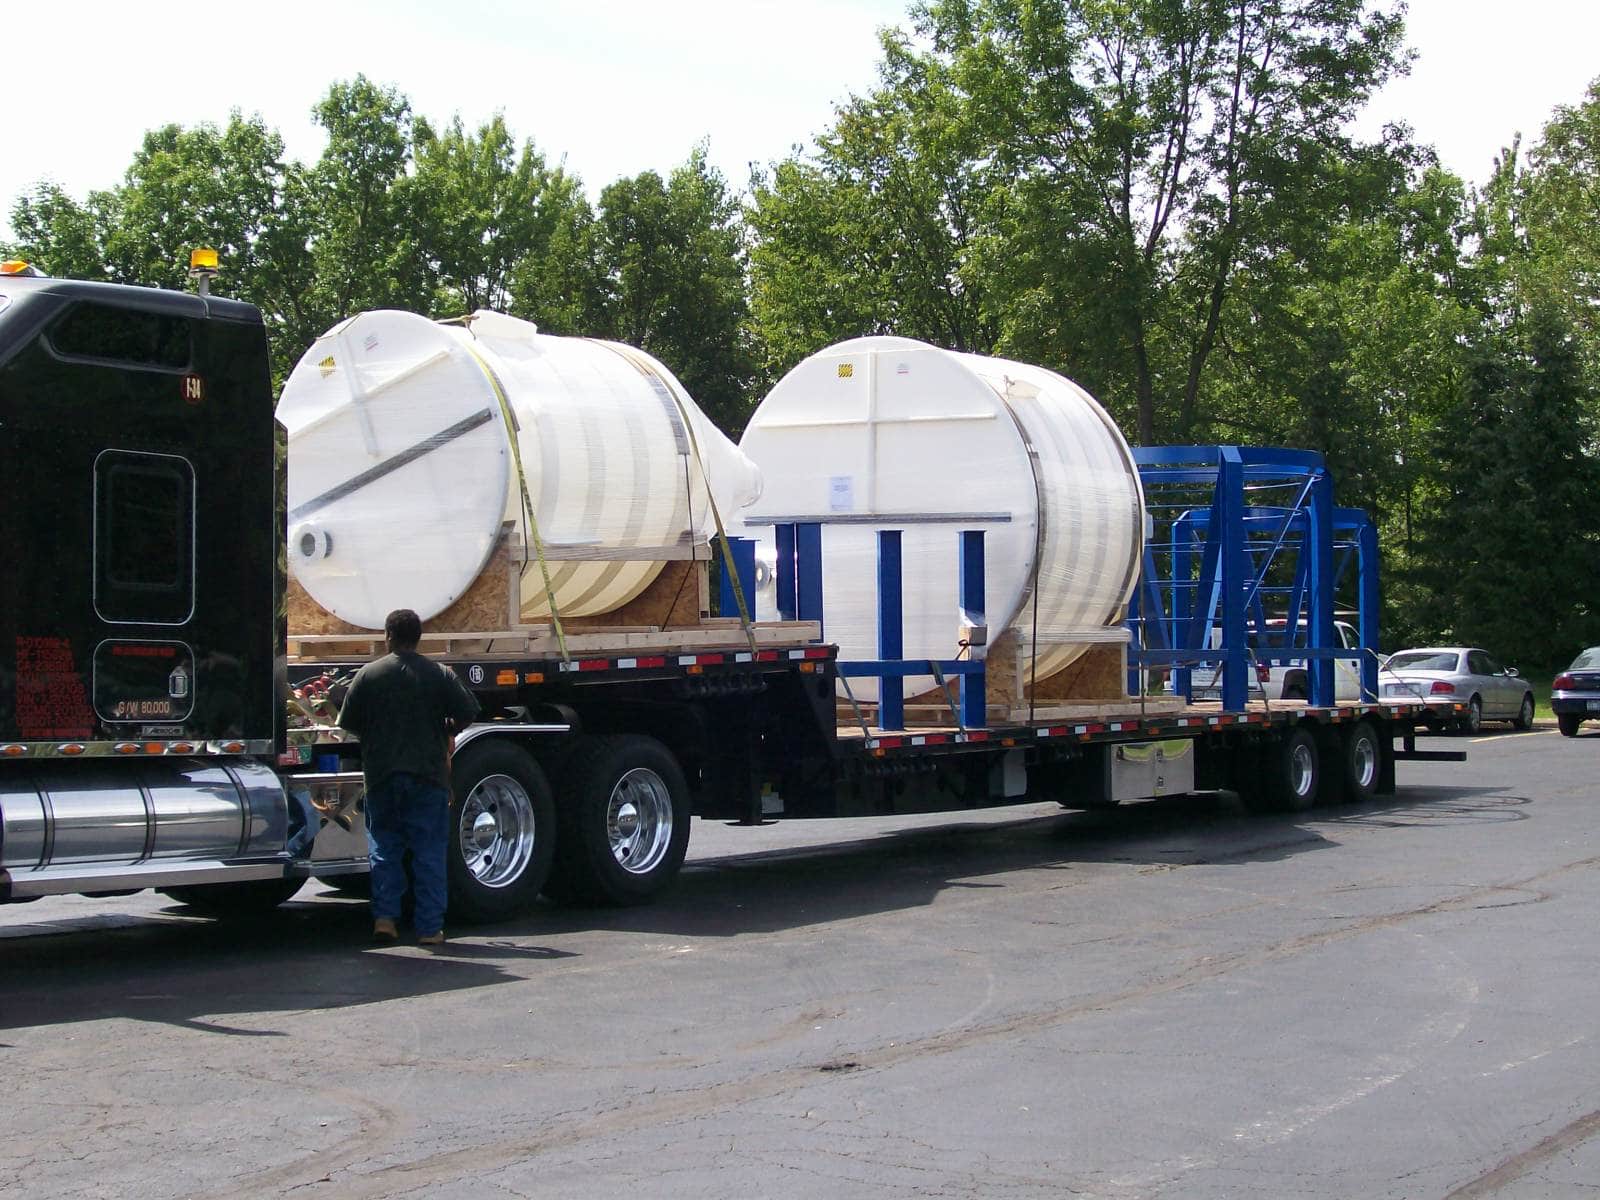 How Can I Safely Clean My Polyethylene Transporter Tank?